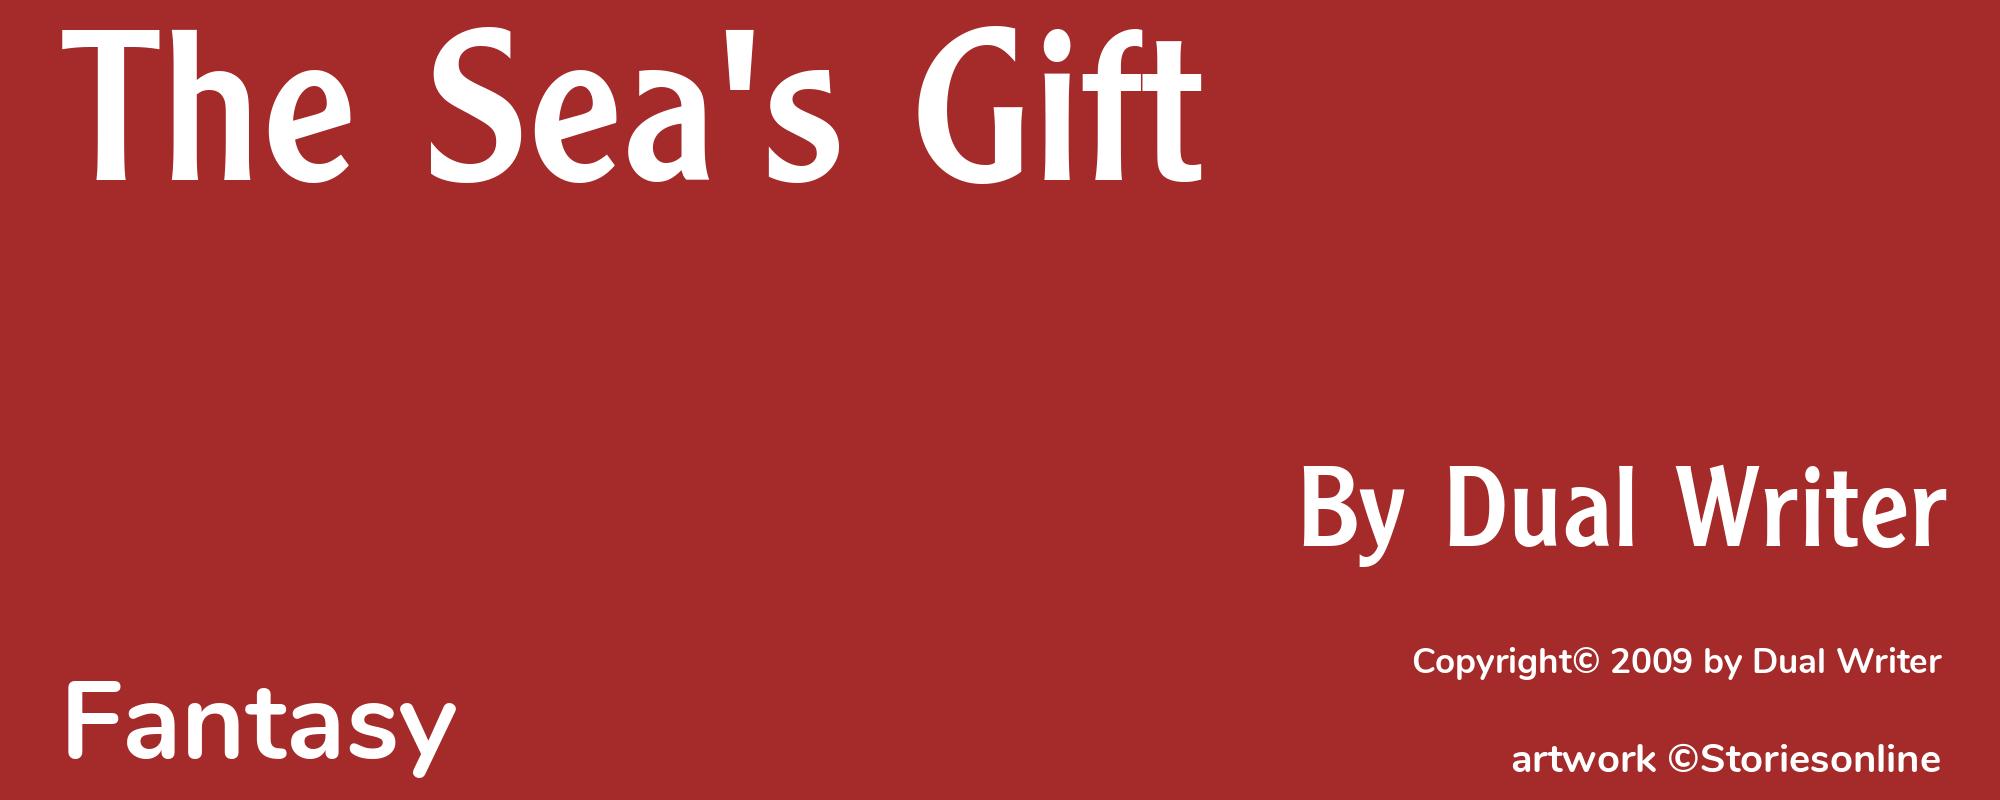 The Sea's Gift - Cover